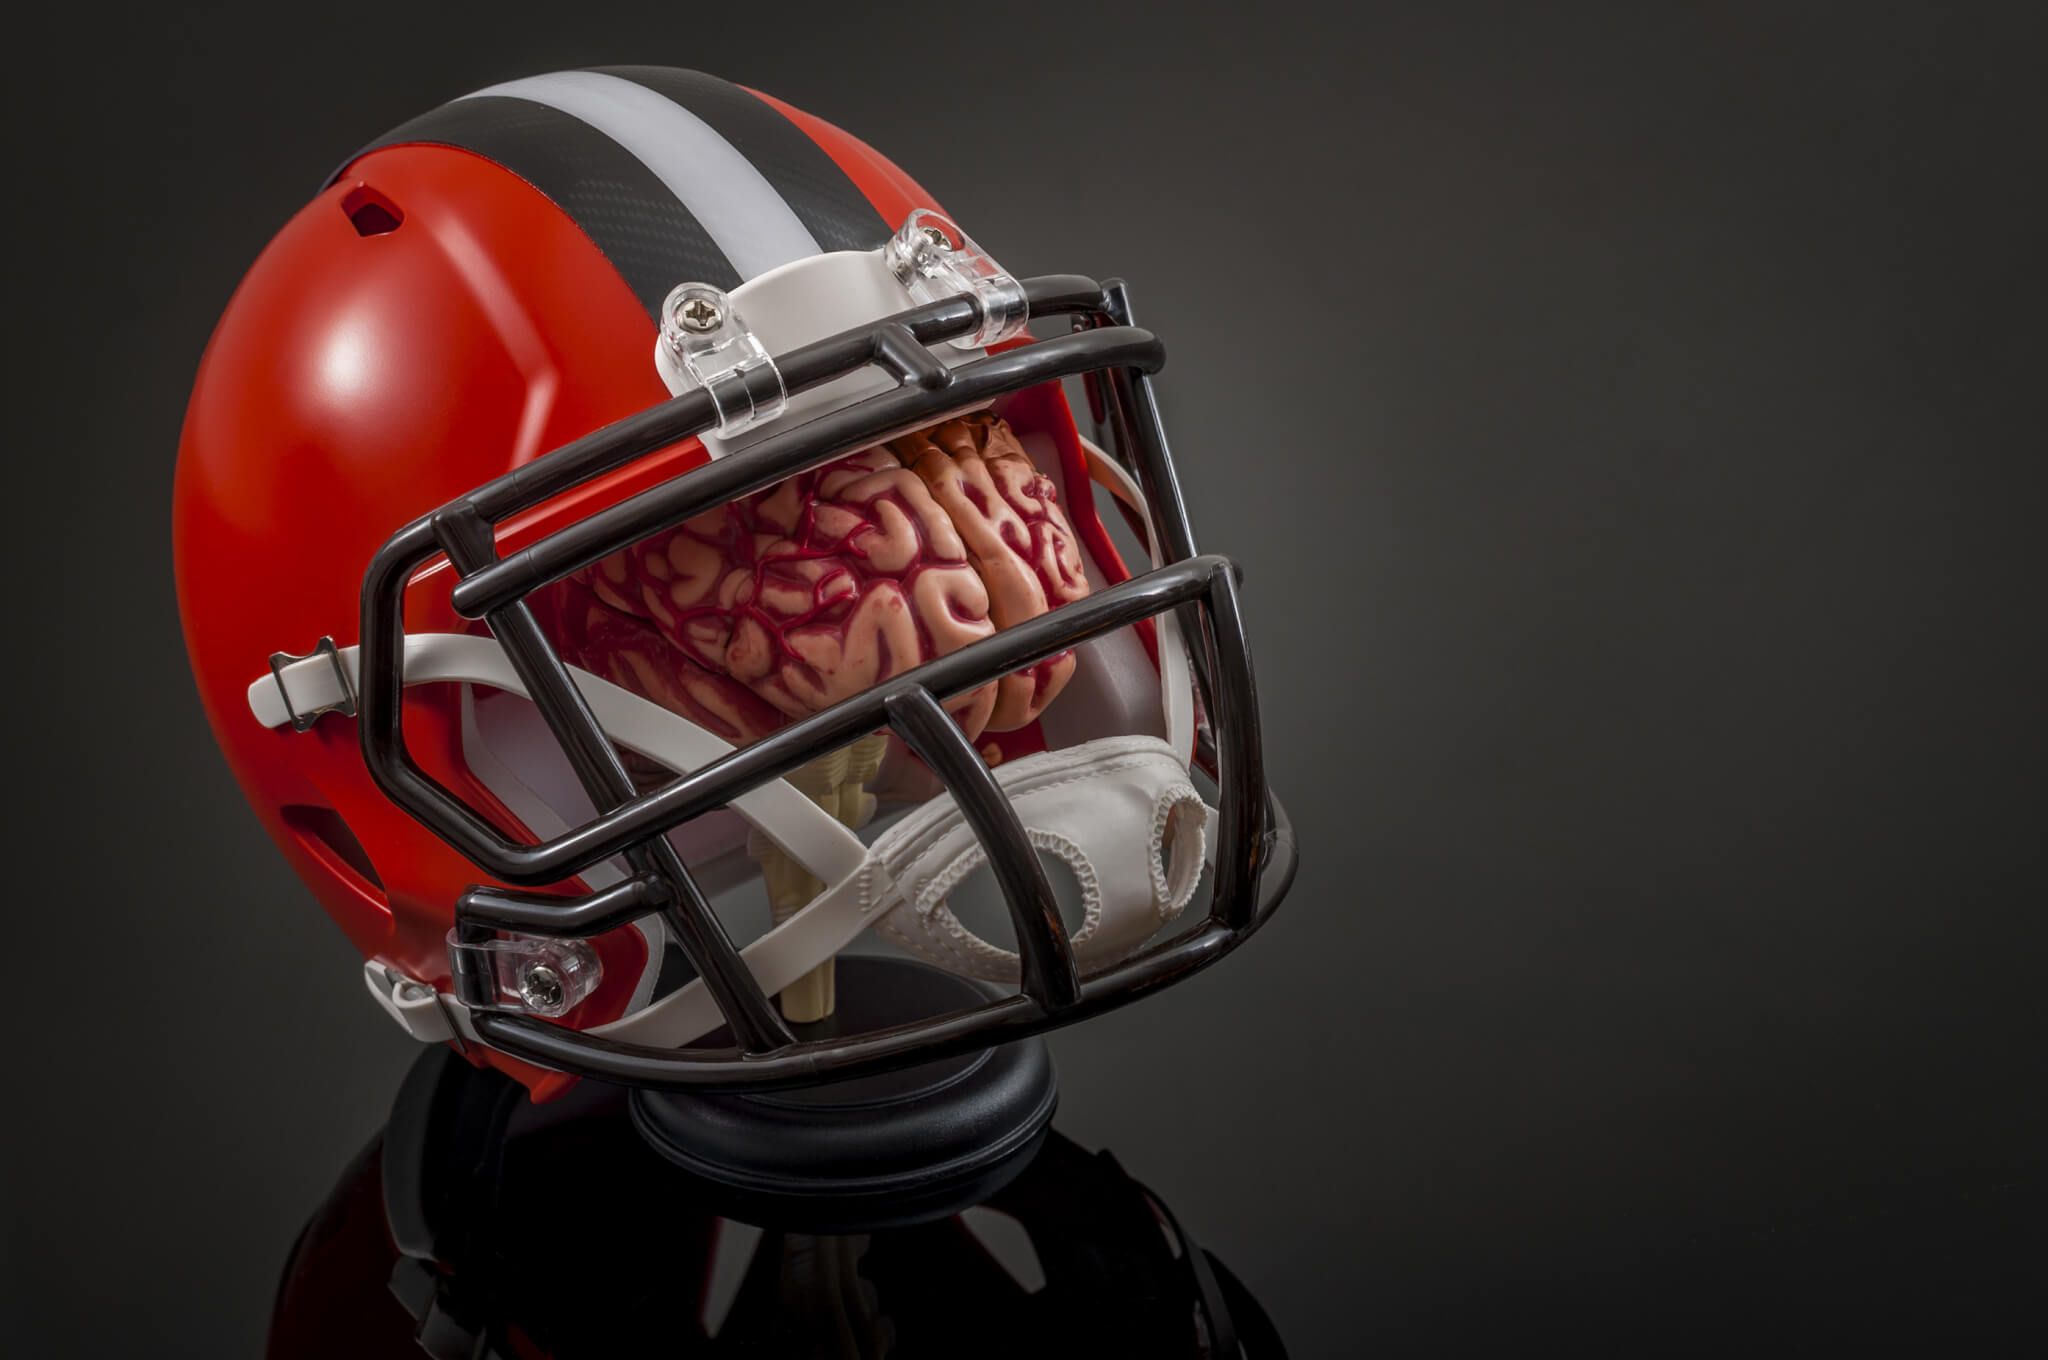 Football helmet over brain: concussions and head injuries